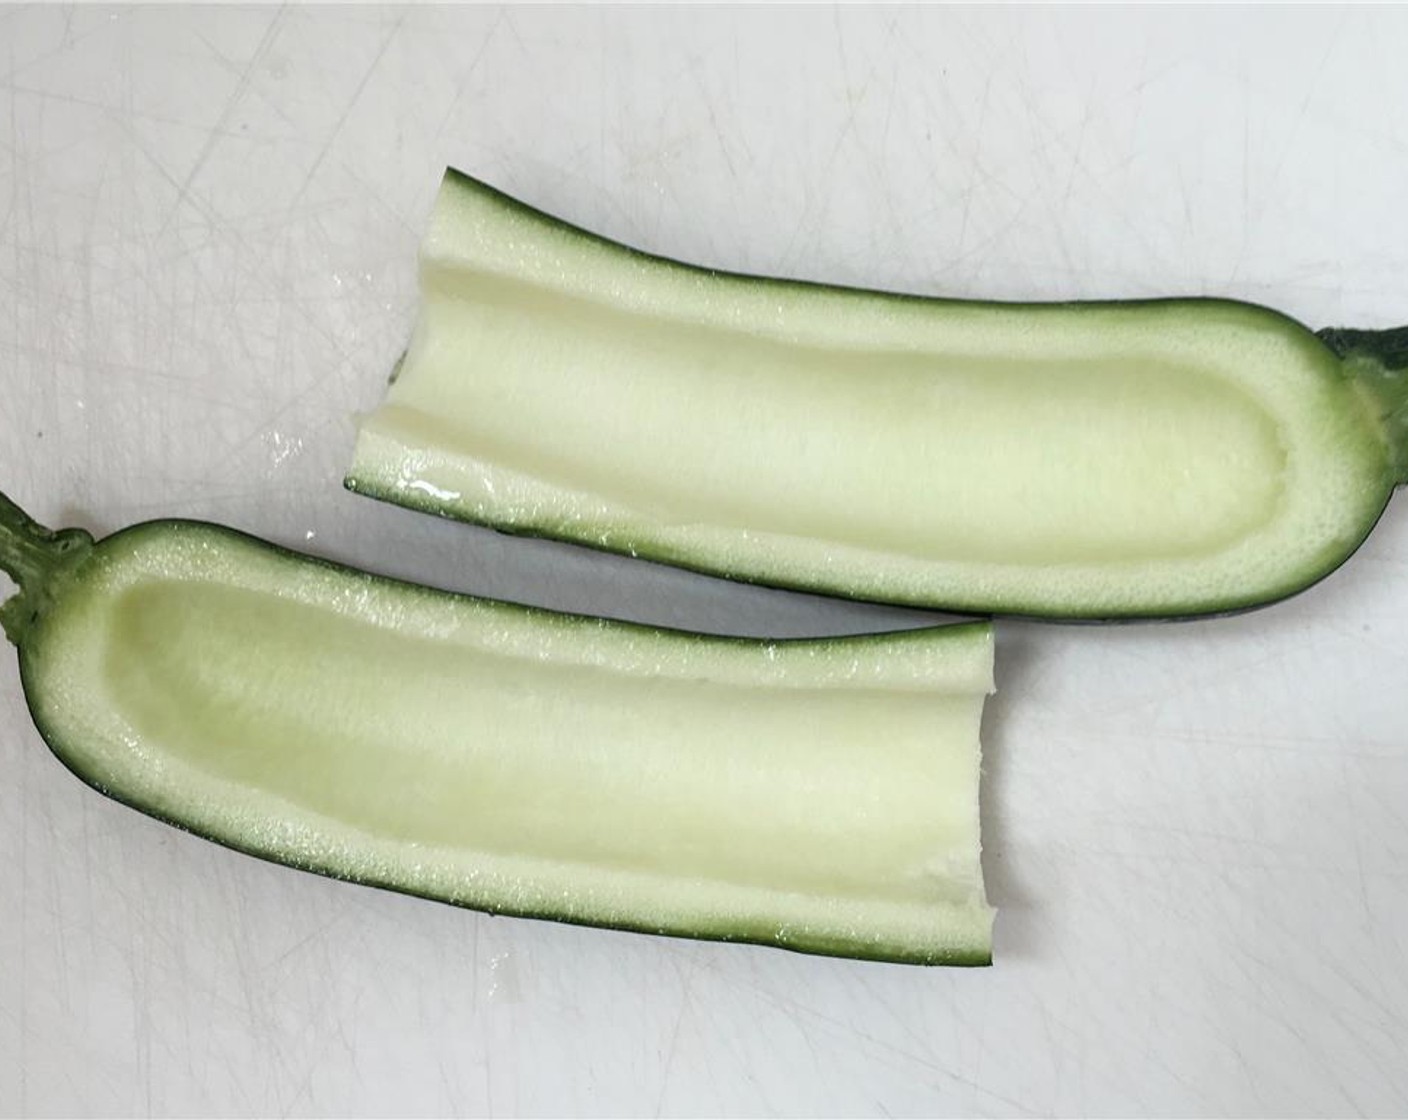 step 2 Slice the Zucchini (1) in half lengthwise. Remove the softer inside of the zucchini using a teaspoon.